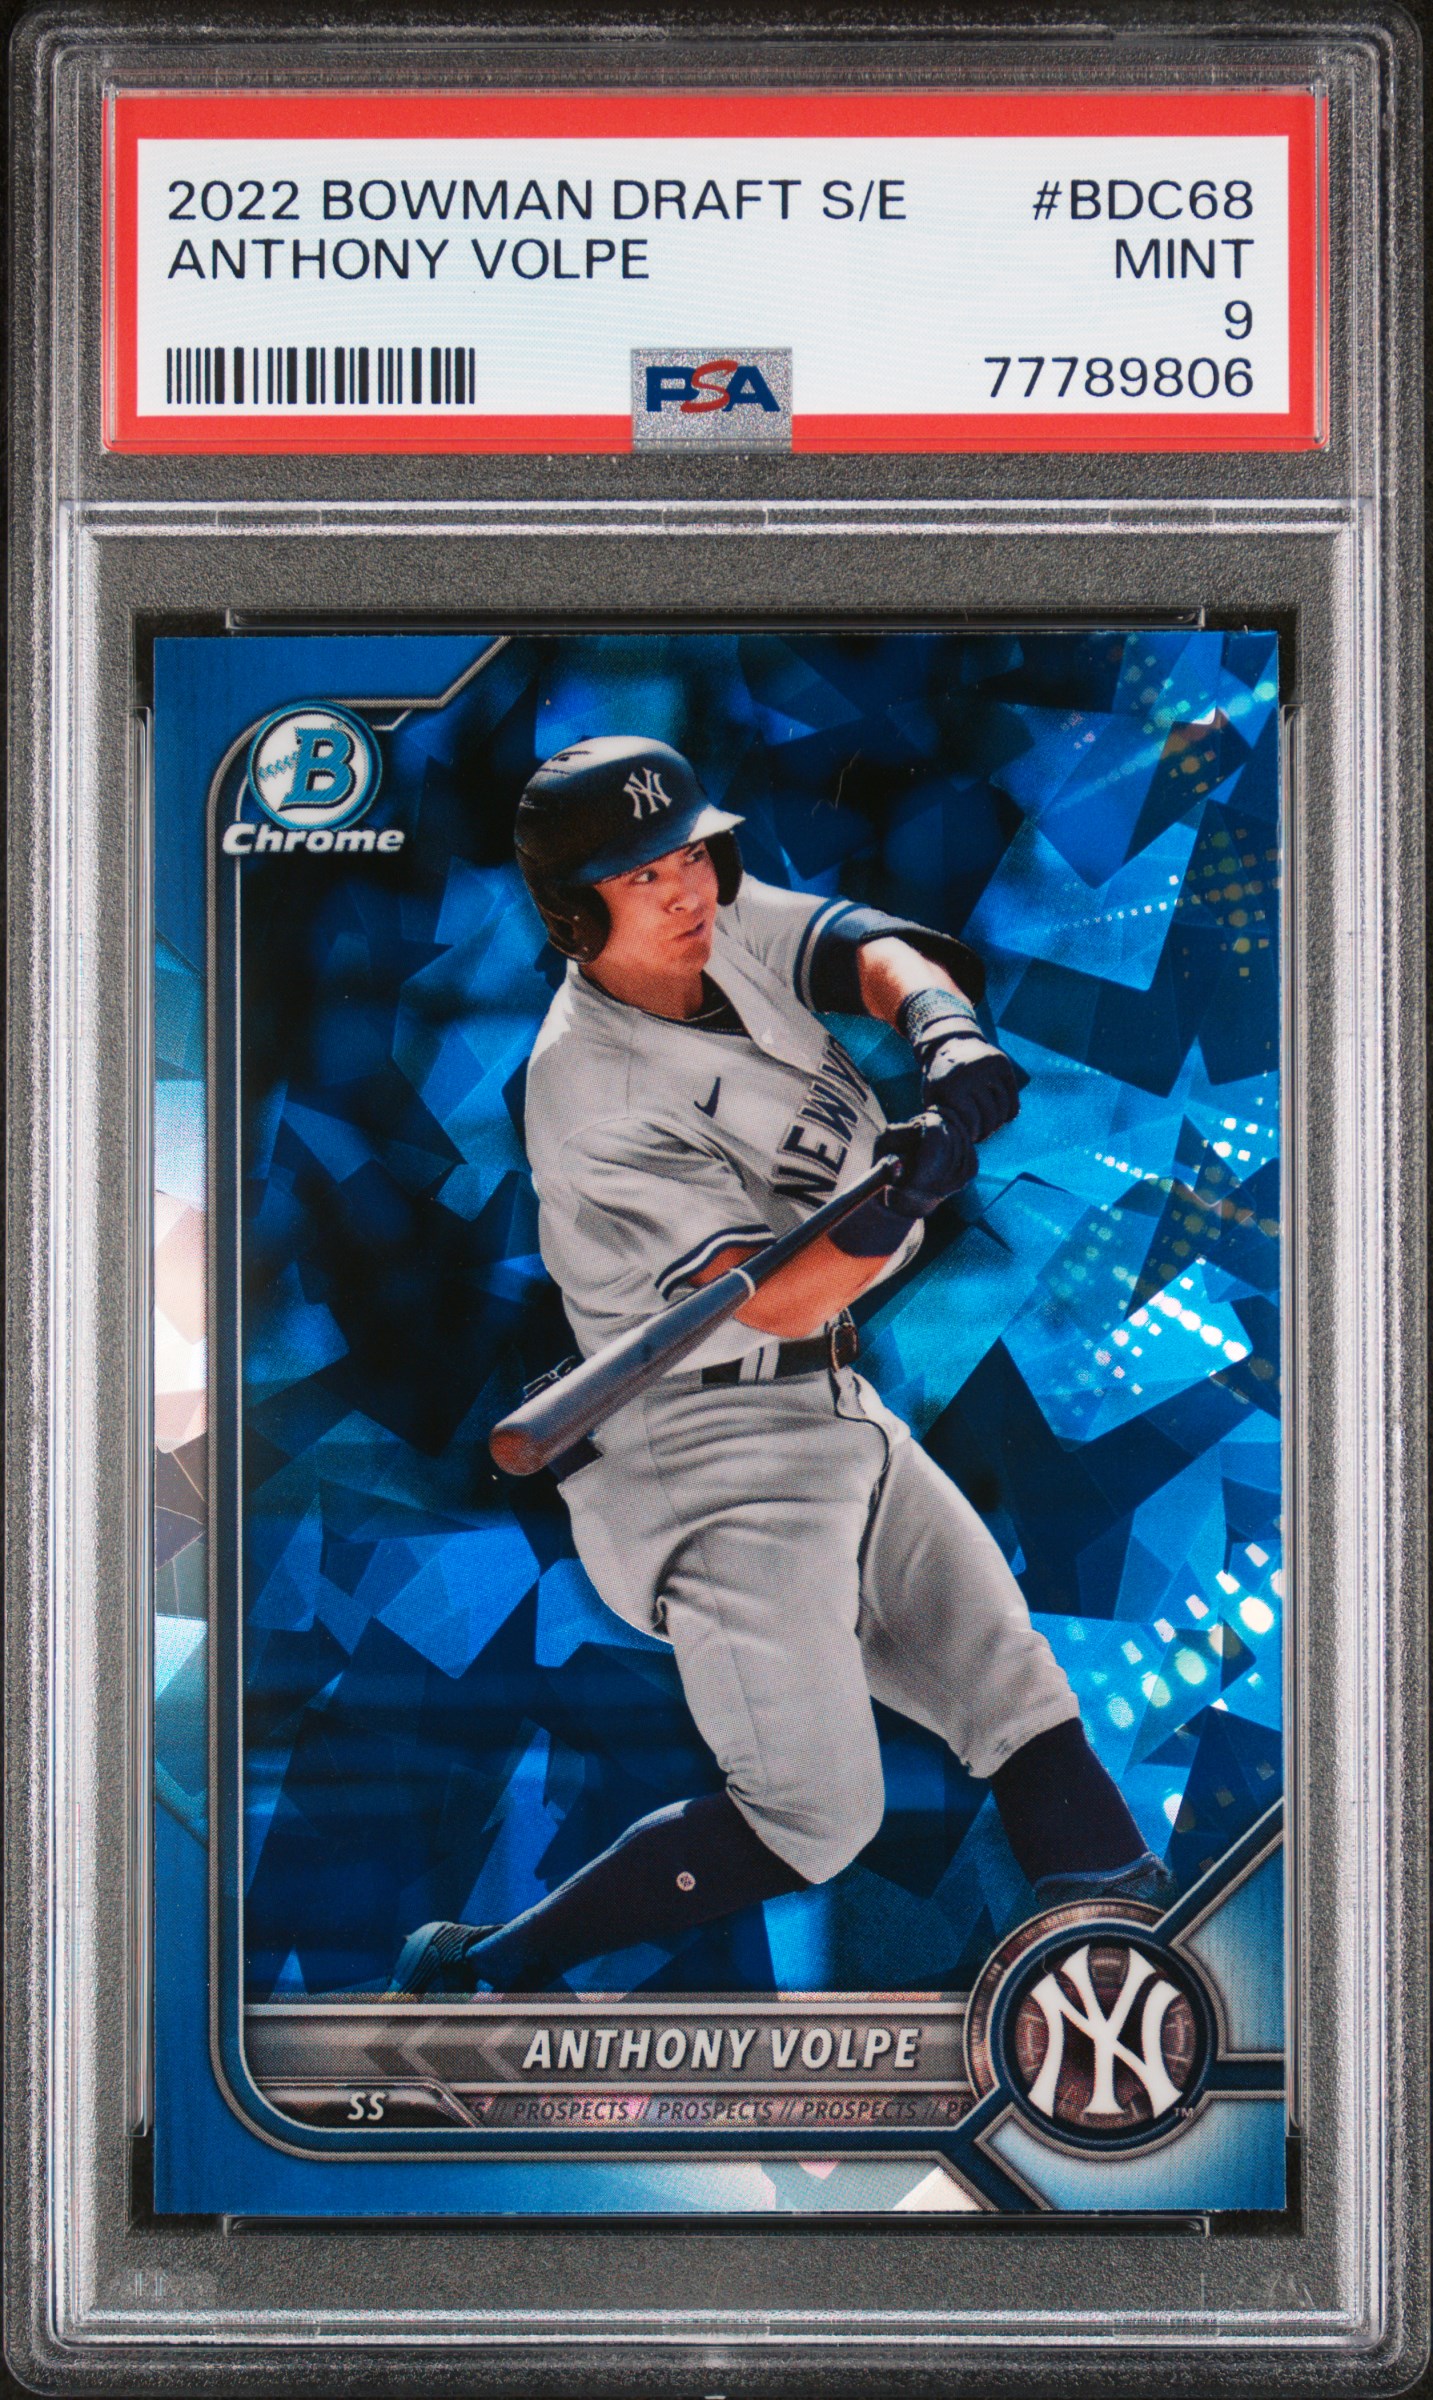 2022 Bowman Draft Chrome Sapphire Edition #BDC68 Anthony Volpe Rookie Card – PSA MINT 9.0